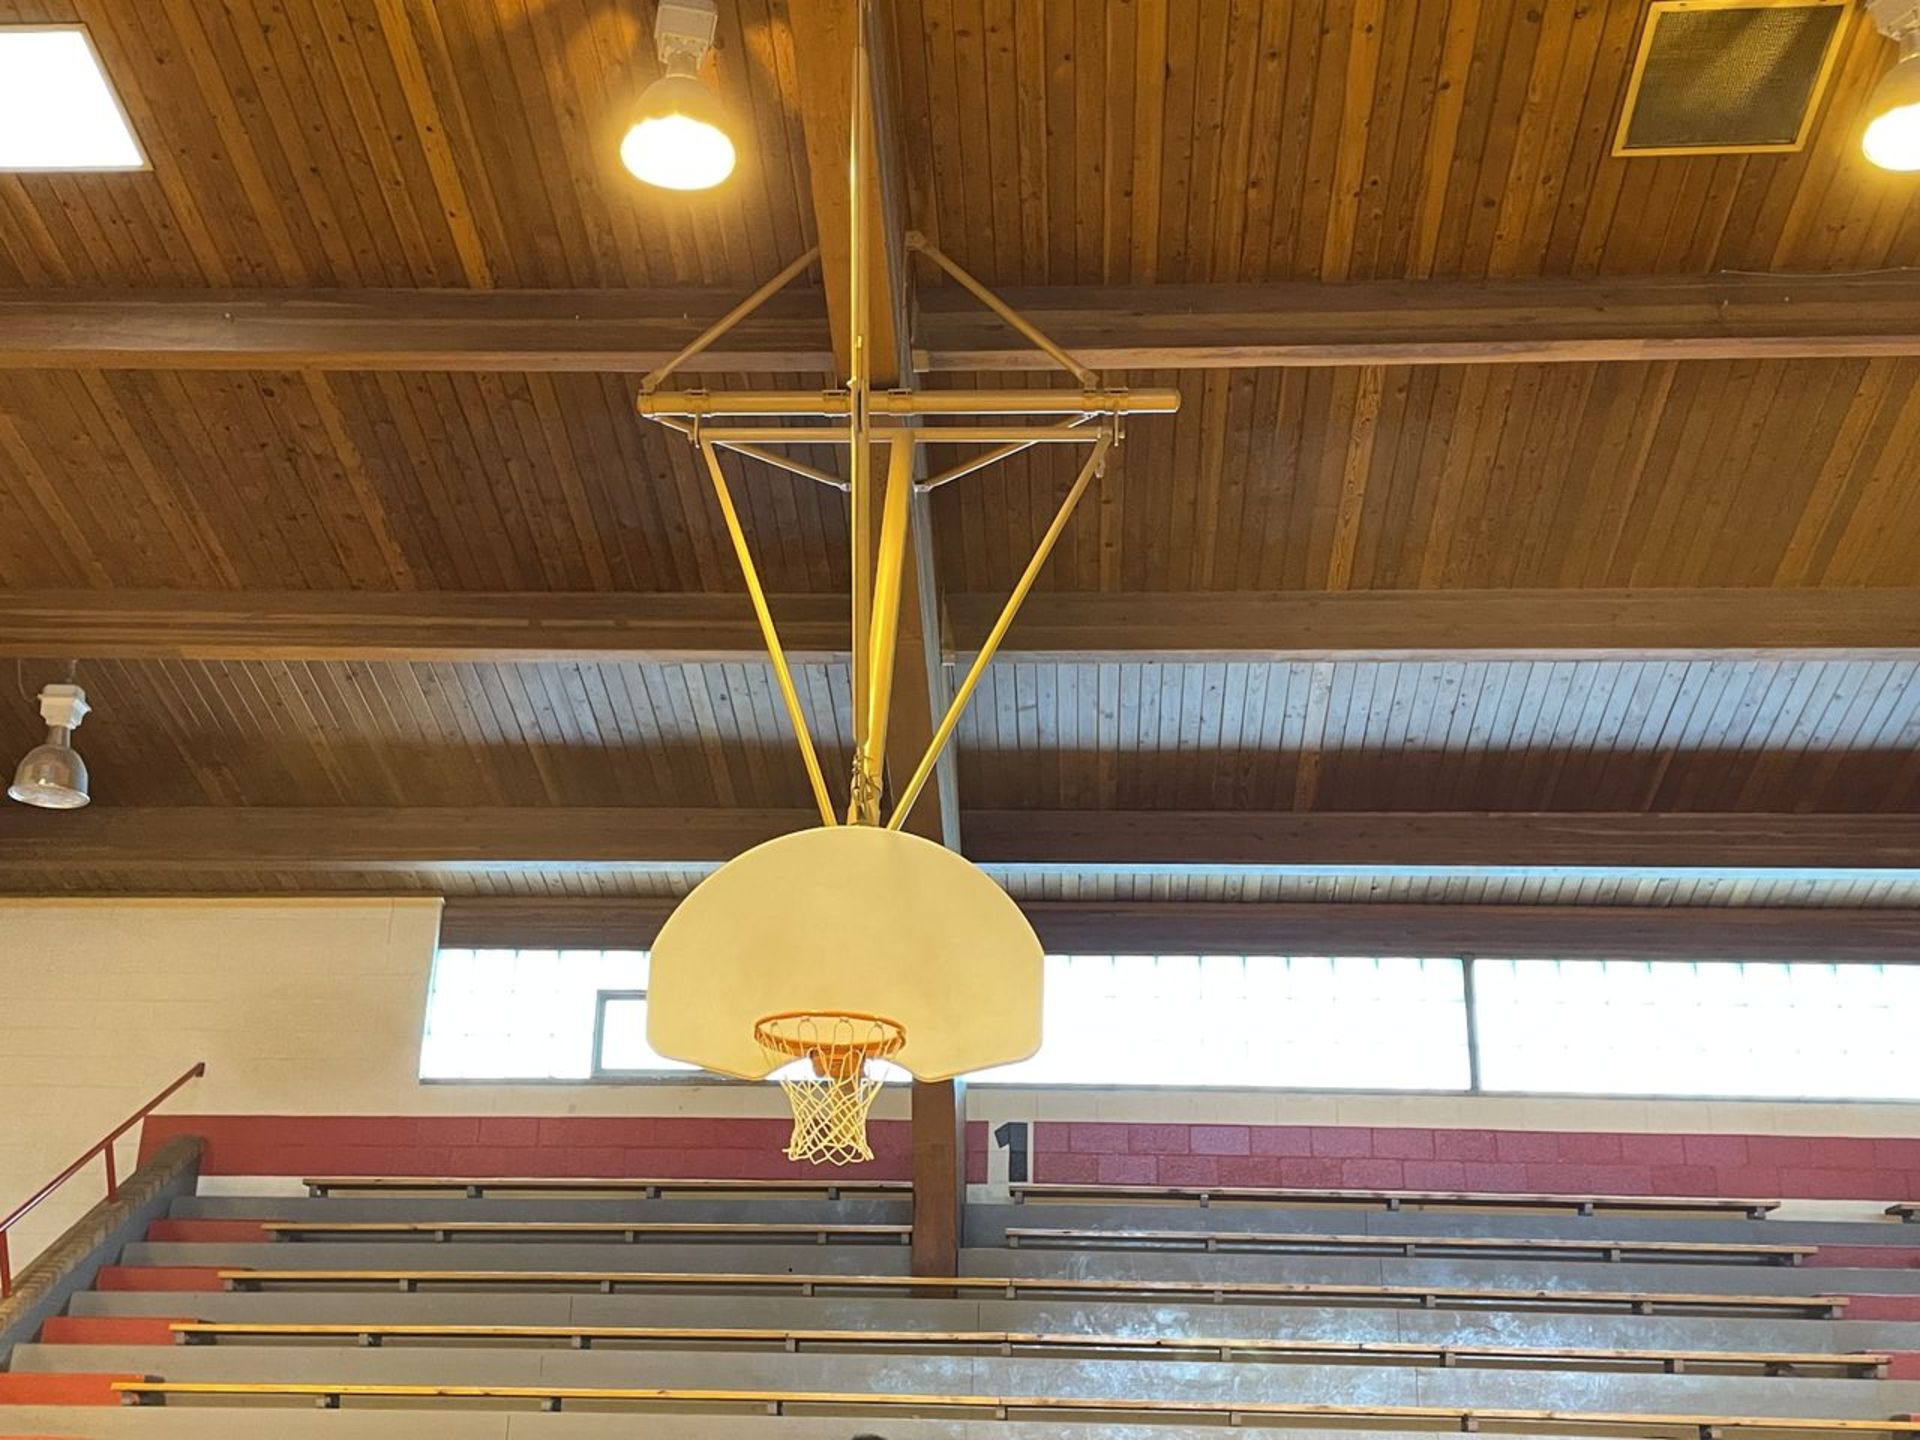 Lot - (2) Wood Backboards with Rim and Net, Ceiling Mounted (Gym)